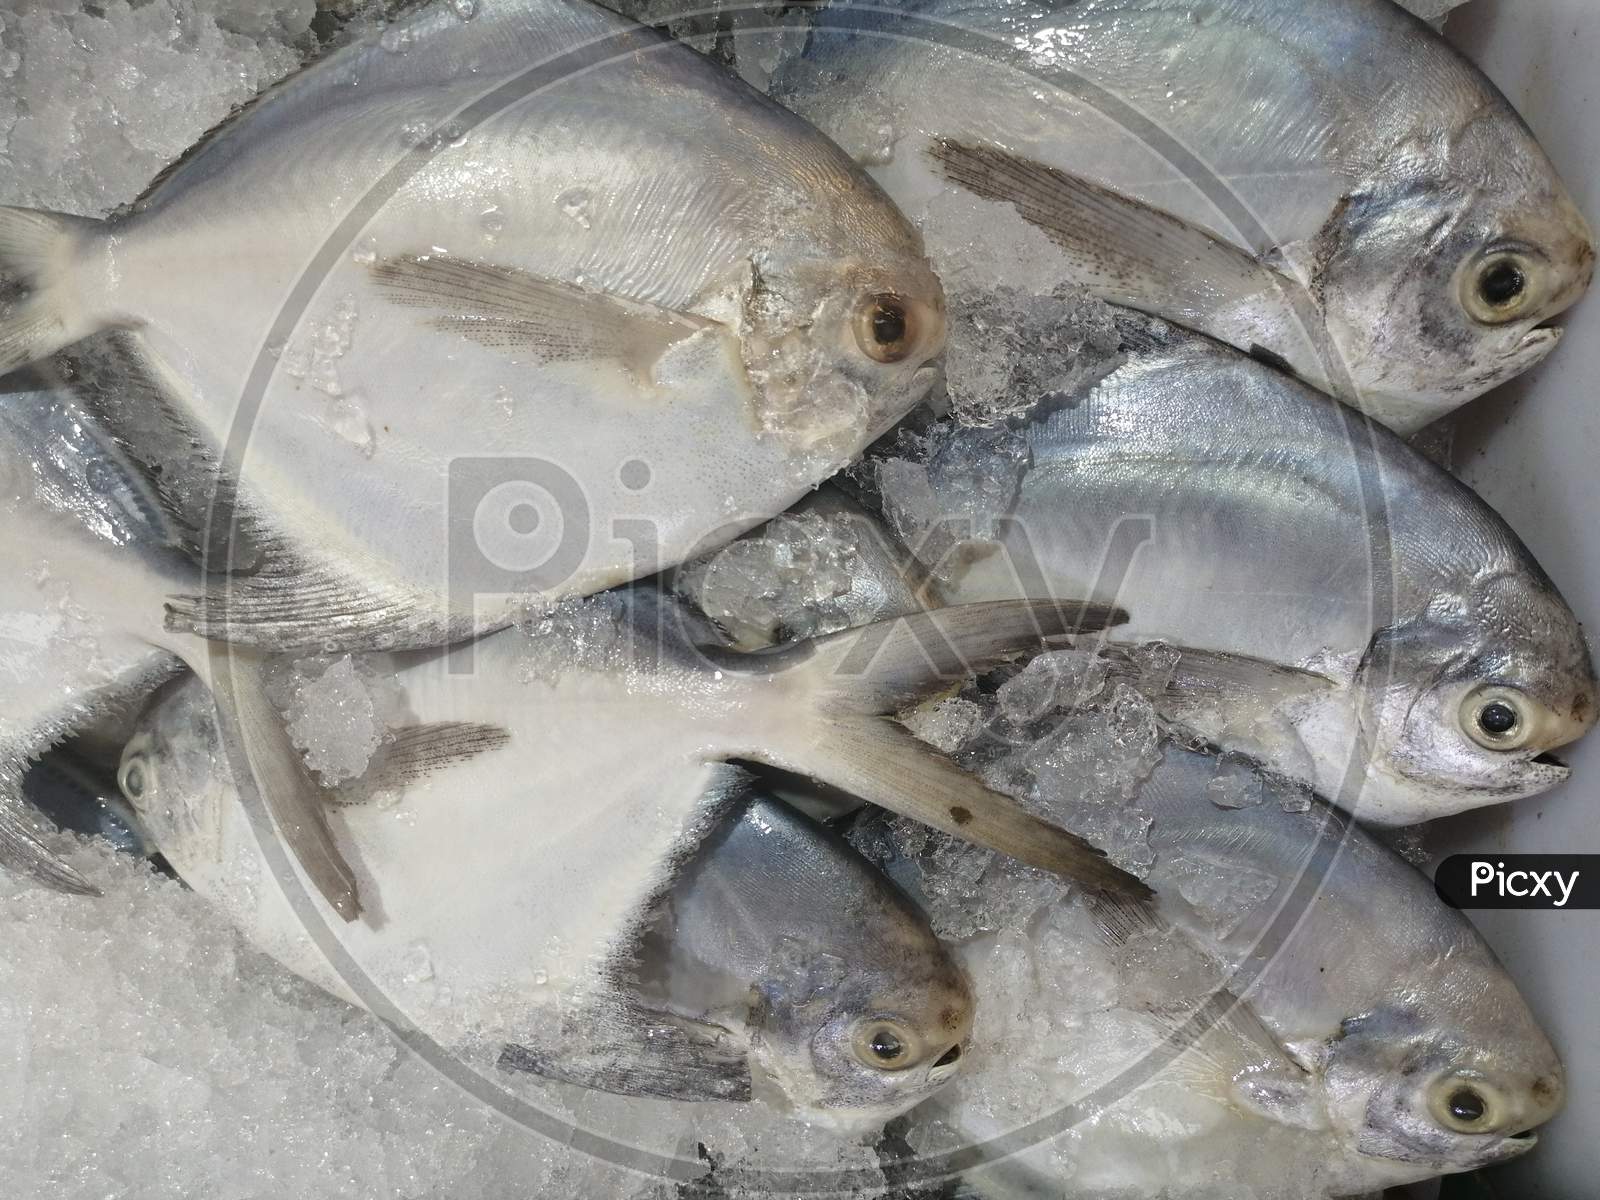 Fresh Pomfret Fish Preserved In Ice For Sale In Market